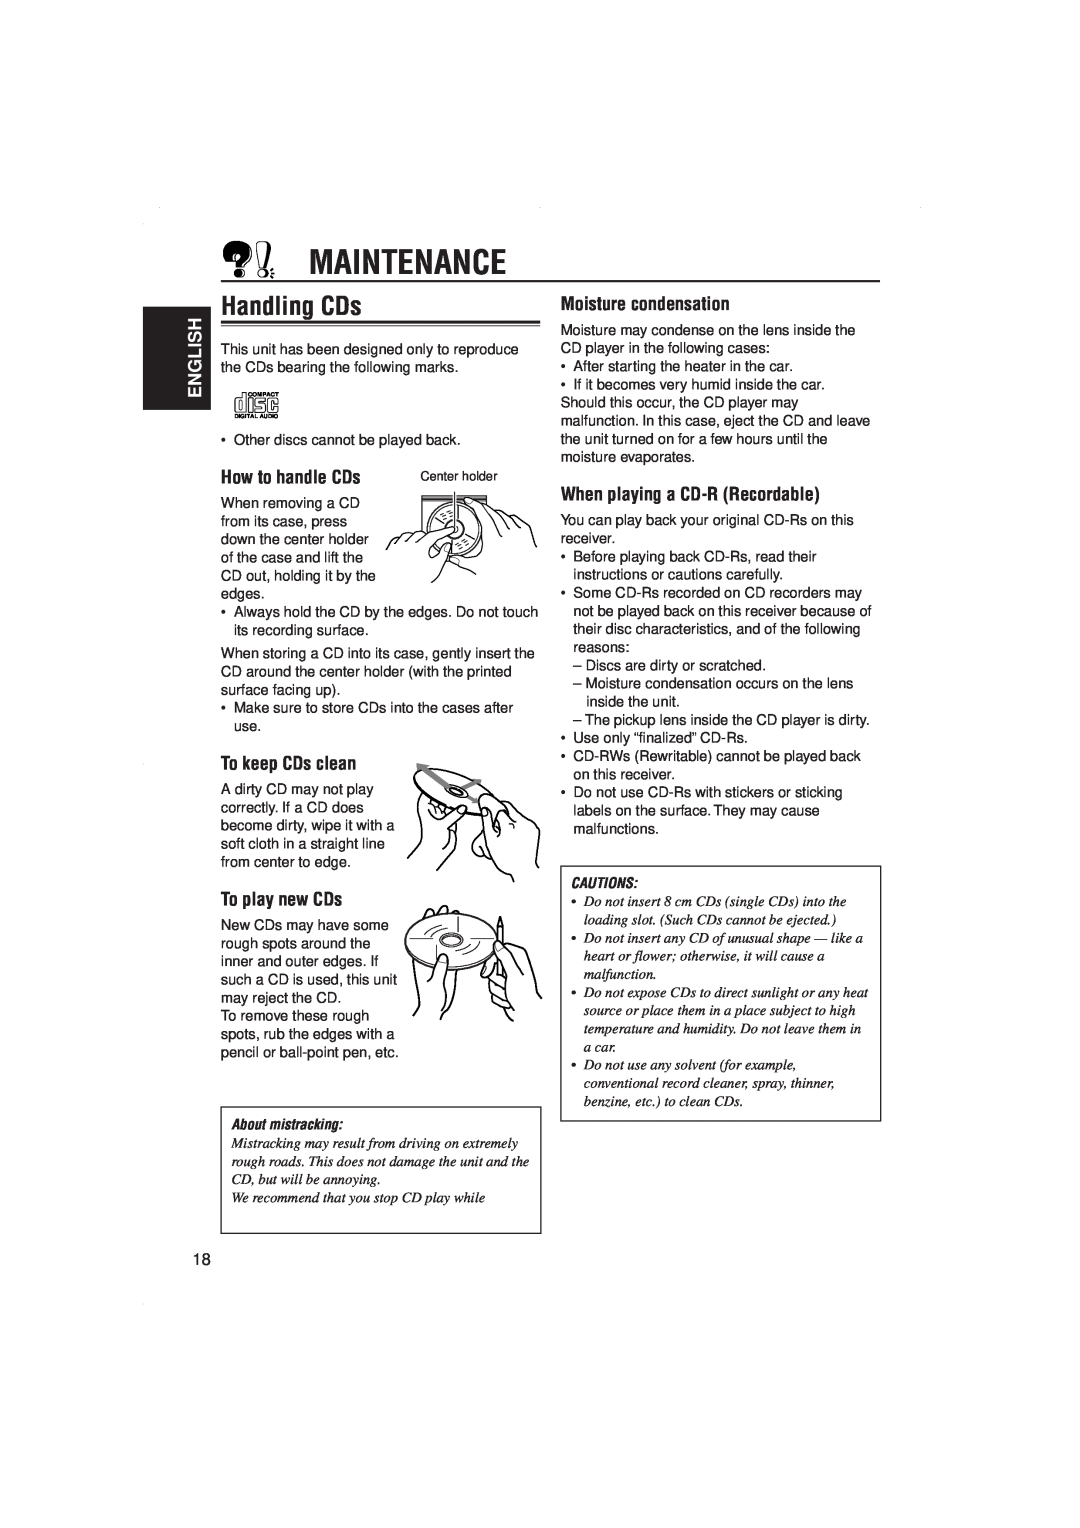 JVC KD-S717 manual Maintenance, Handling CDs, How to handle CDs, To keep CDs clean, To play new CDs, Moisture condensation 